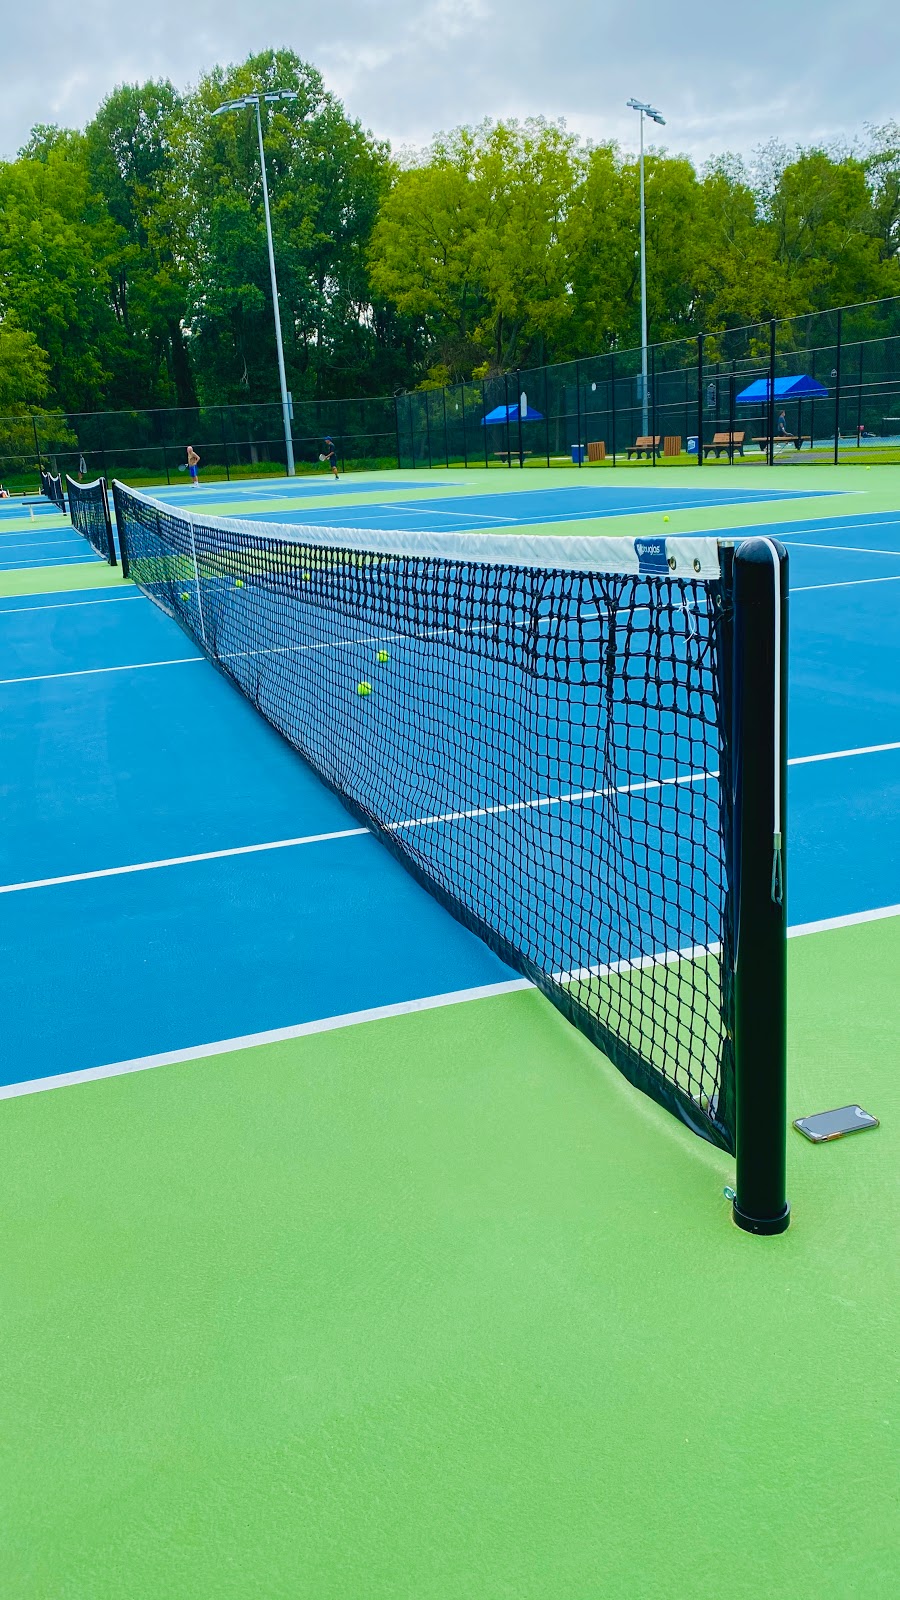 Tennis Courts at Bethel Mills Park | Delsea Dr, Sewell, NJ 08080 | Phone: (856) 589-0047